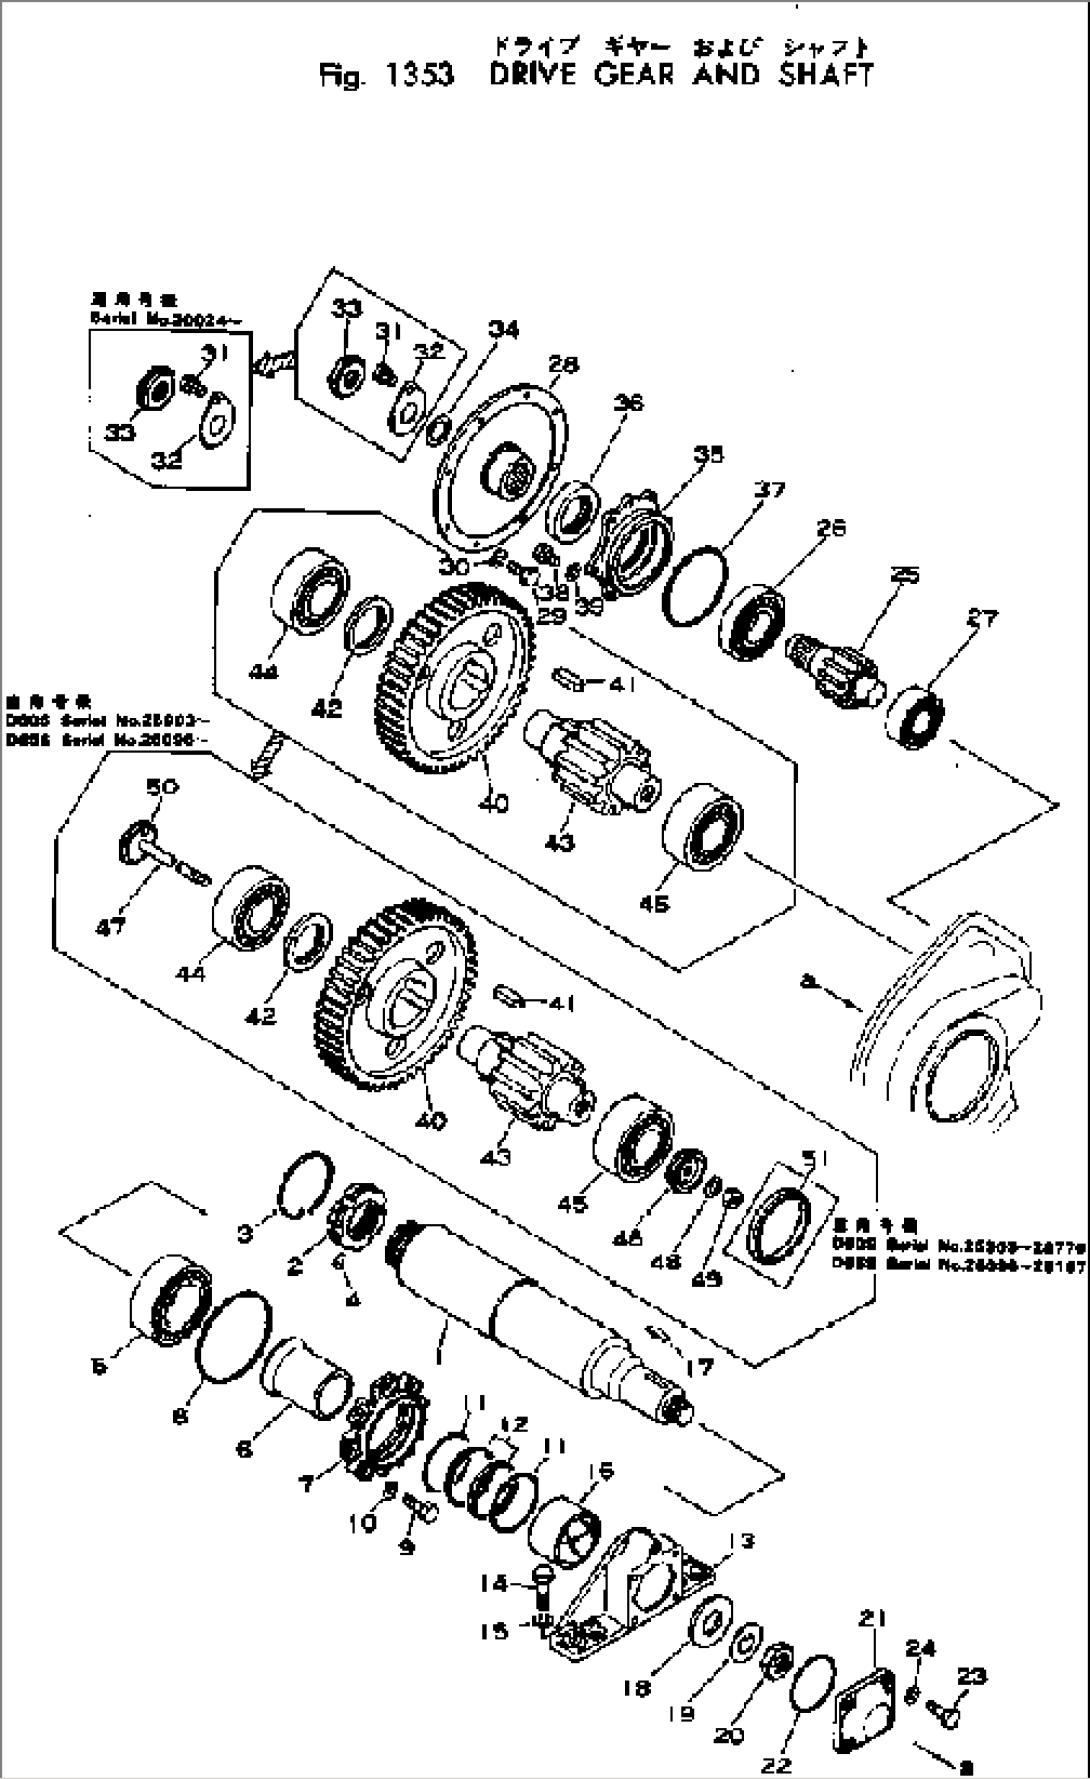 DRIVE GEAR AND SHAFT